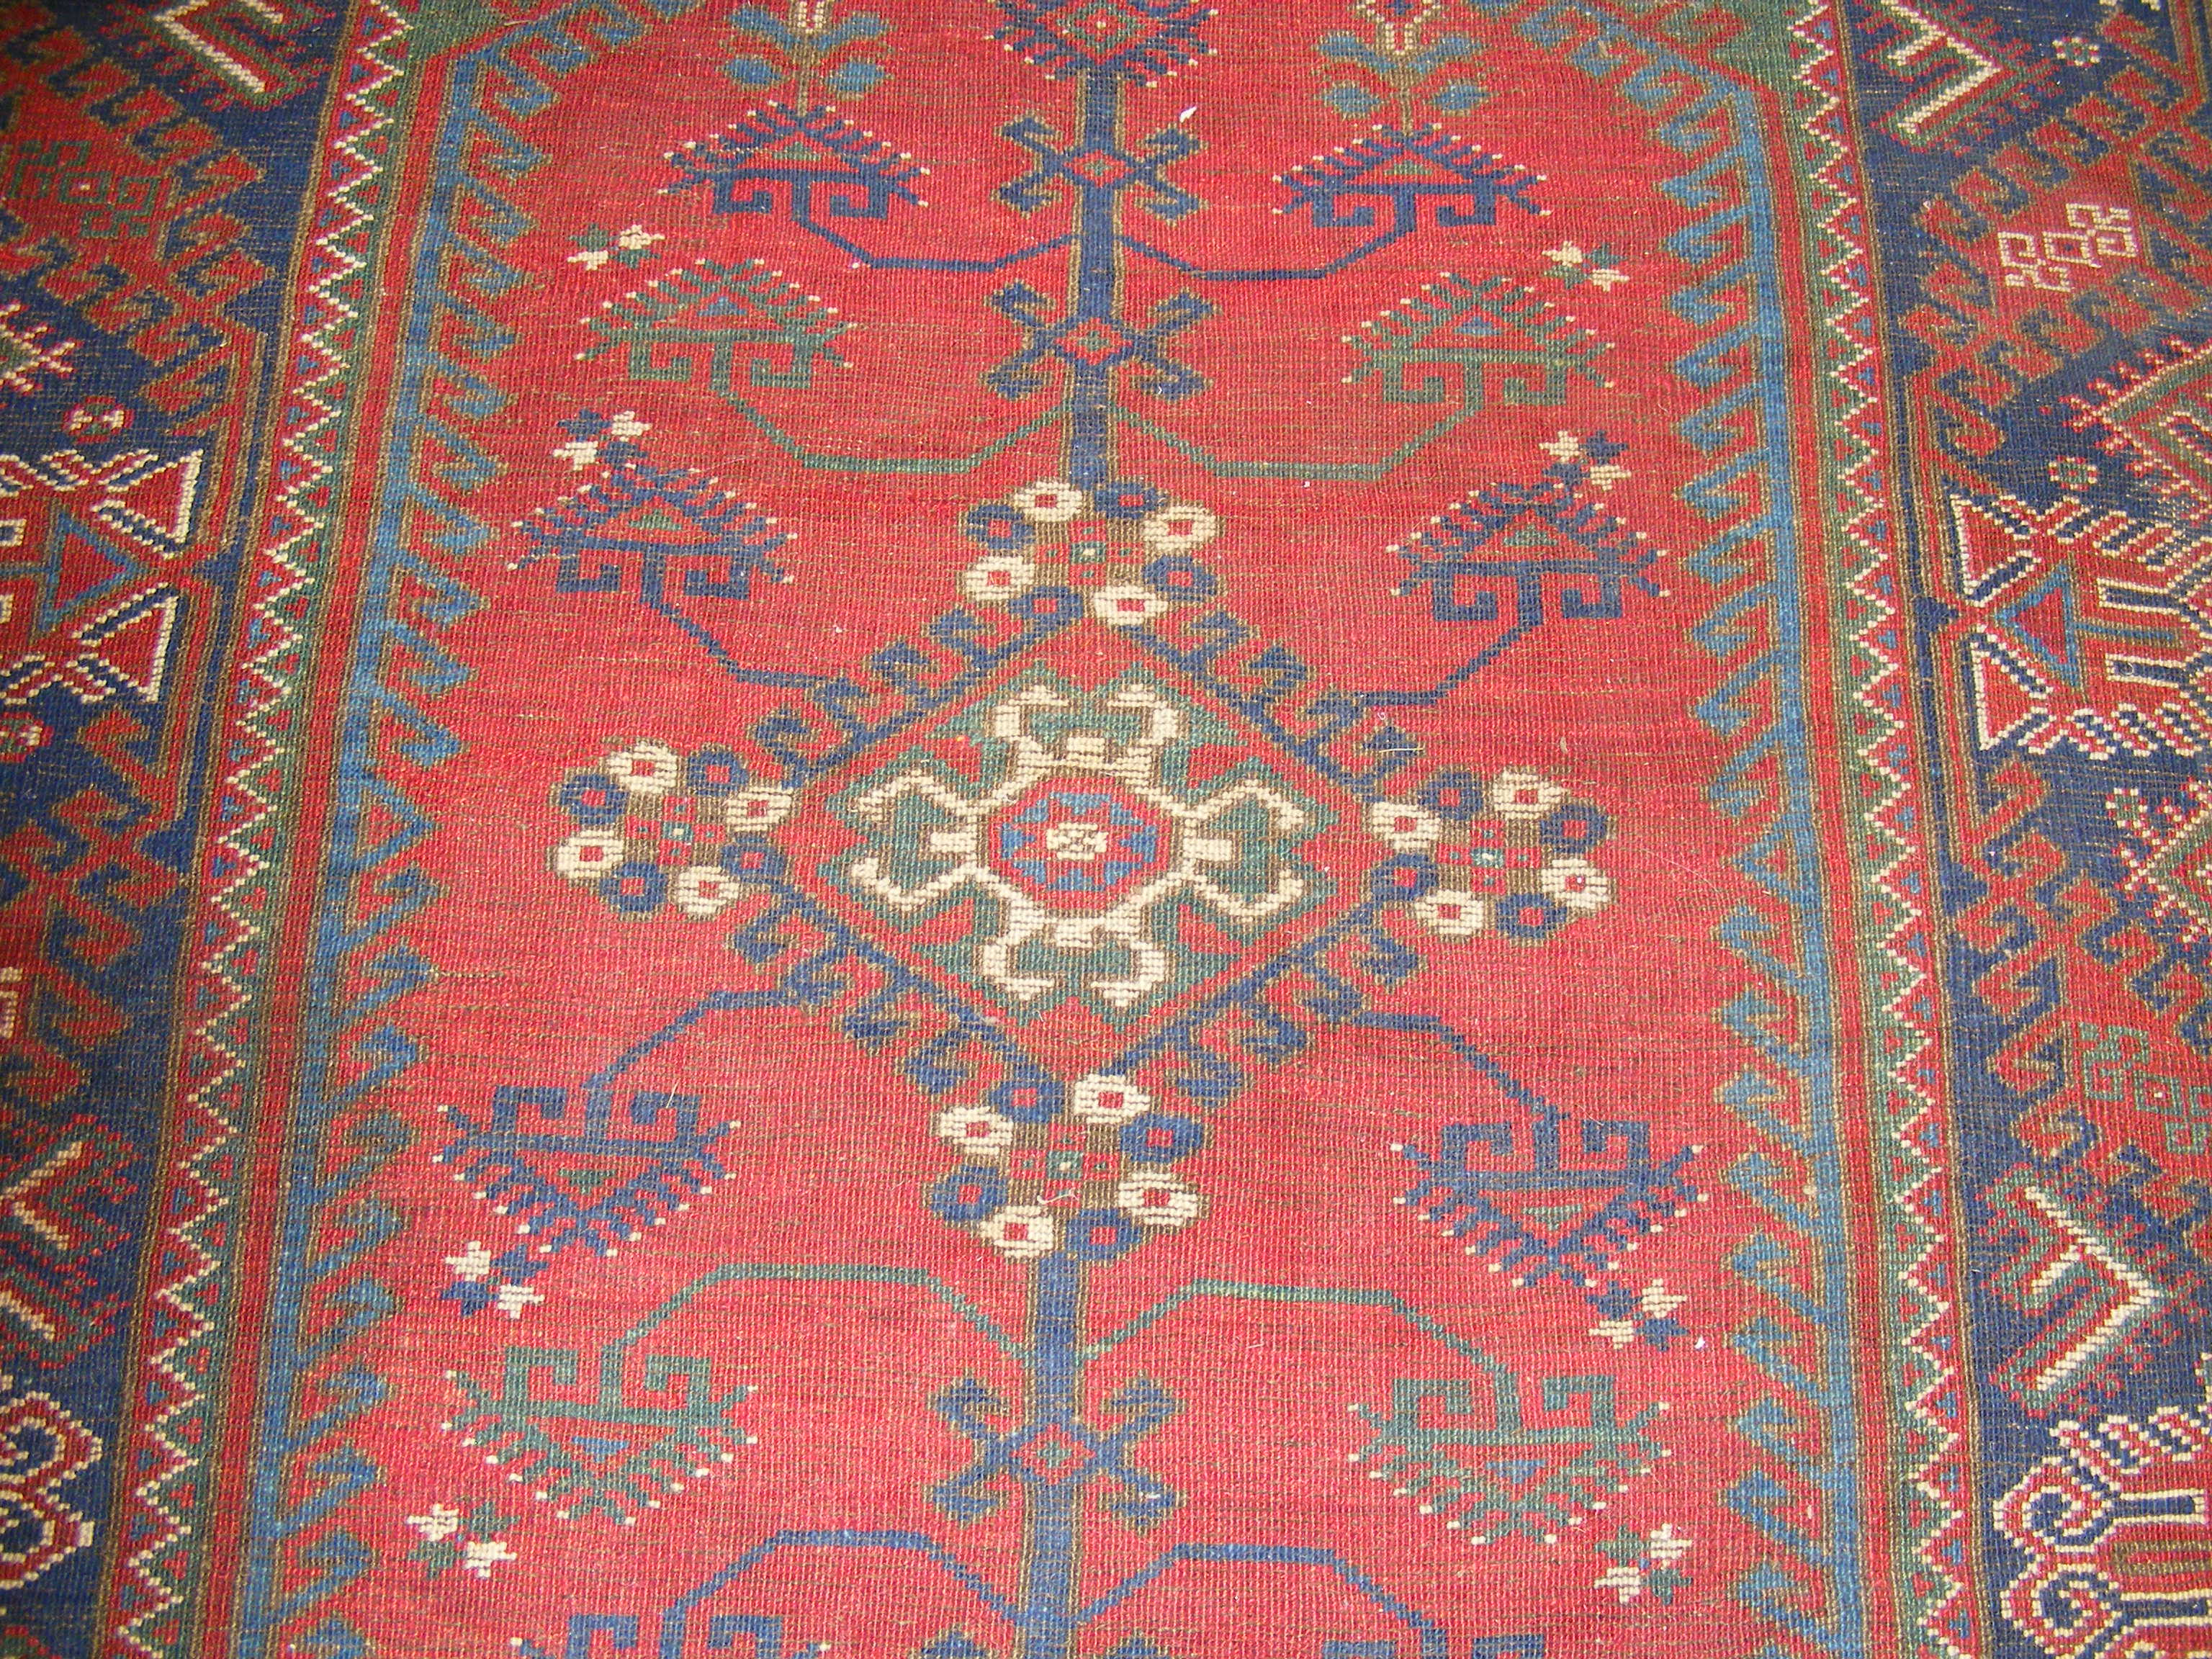 A Middle Eastern rug with geometric border - 150cm - Image 8 of 8